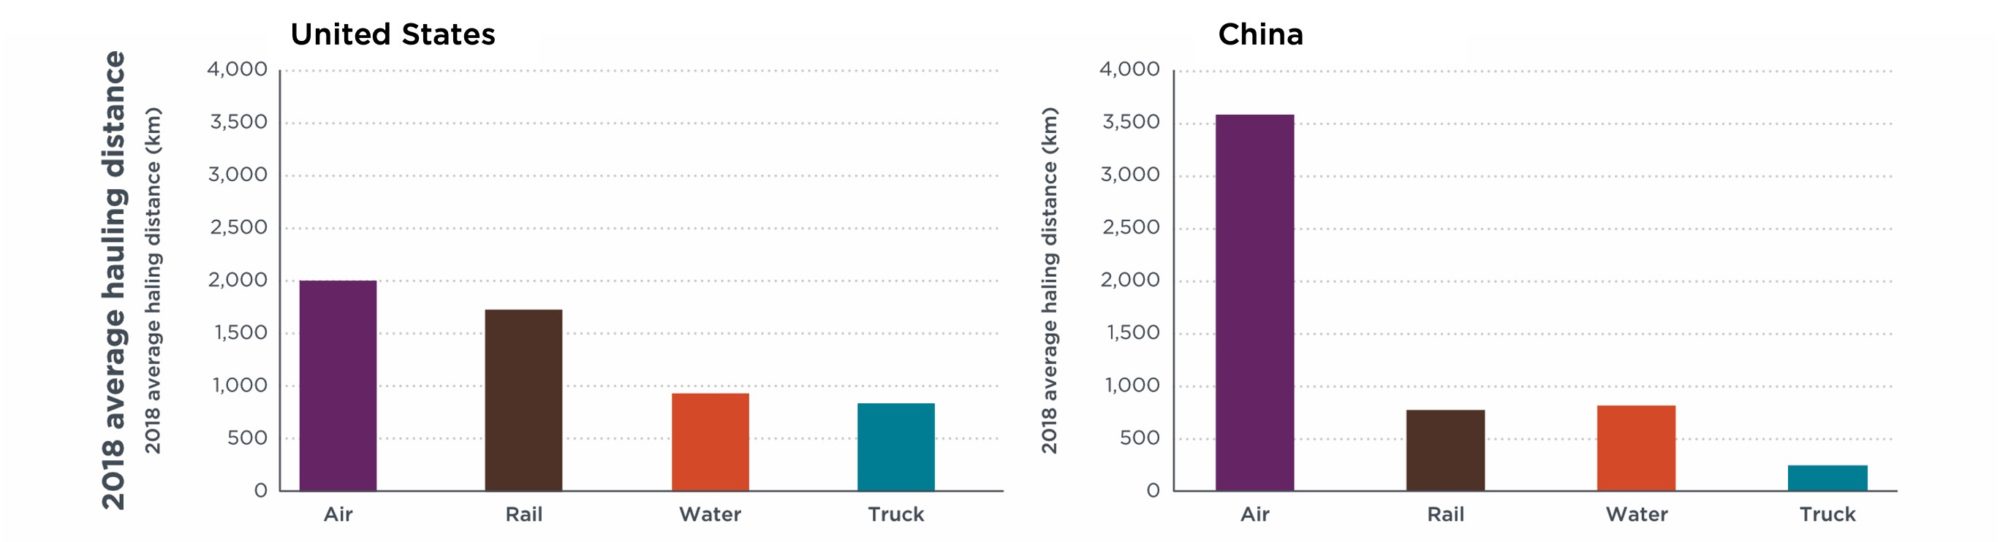 bar chart shows shipping distances across air, rail, water, and truck